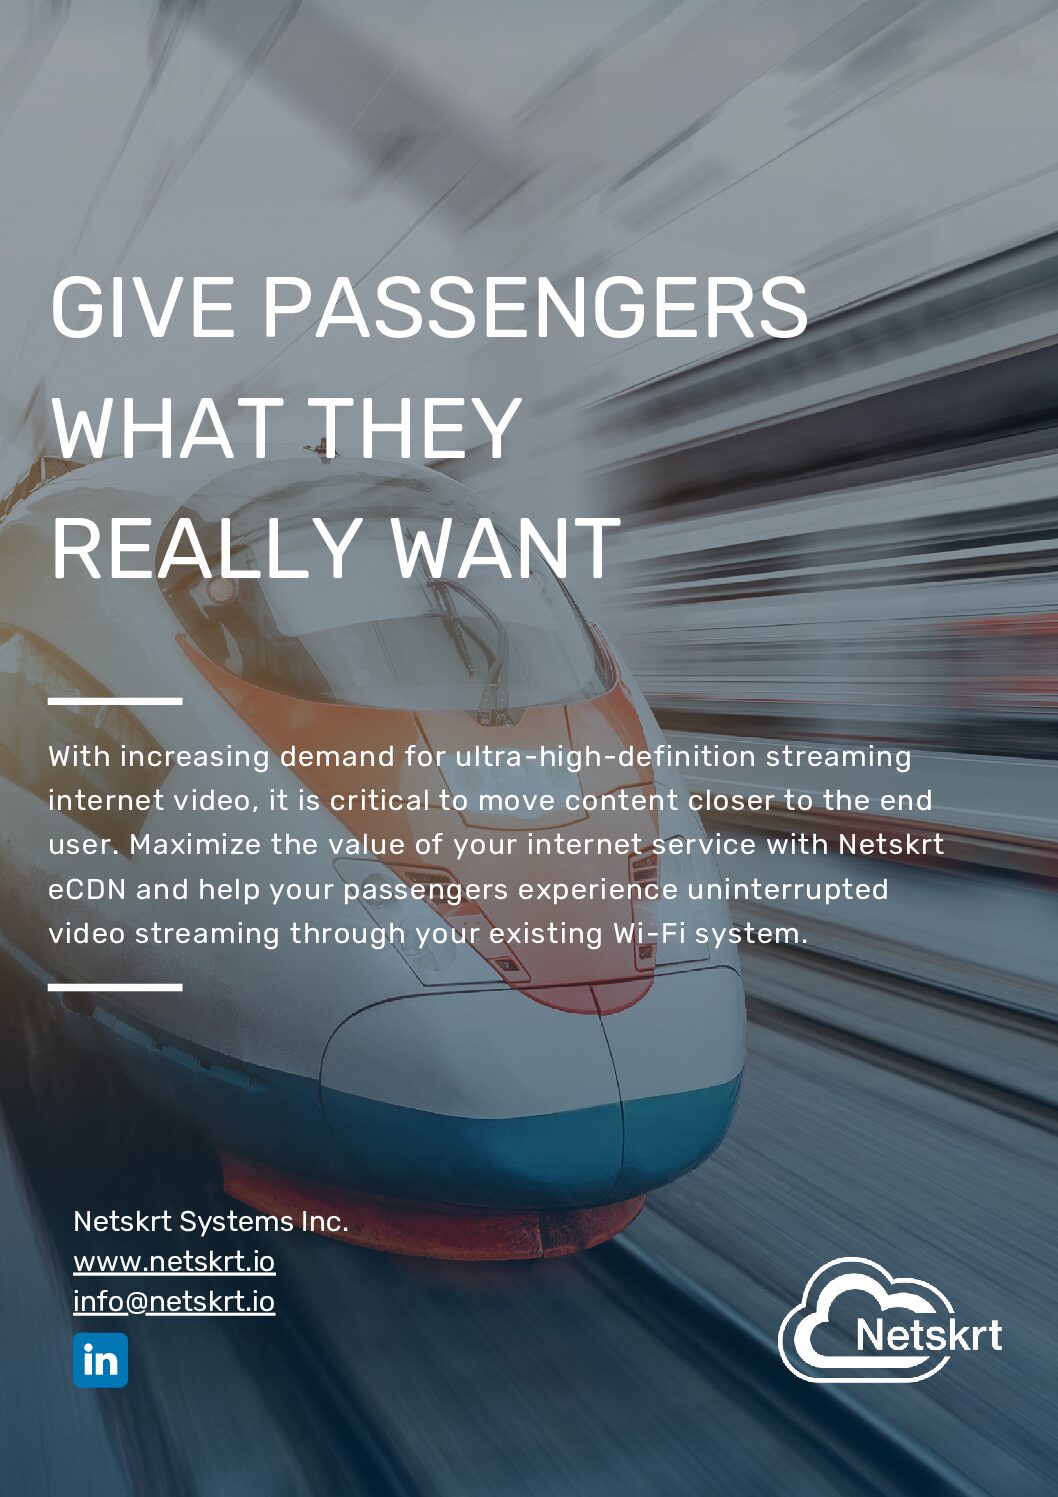 Give Passengers What They Really Want with the Netskrt eCDN